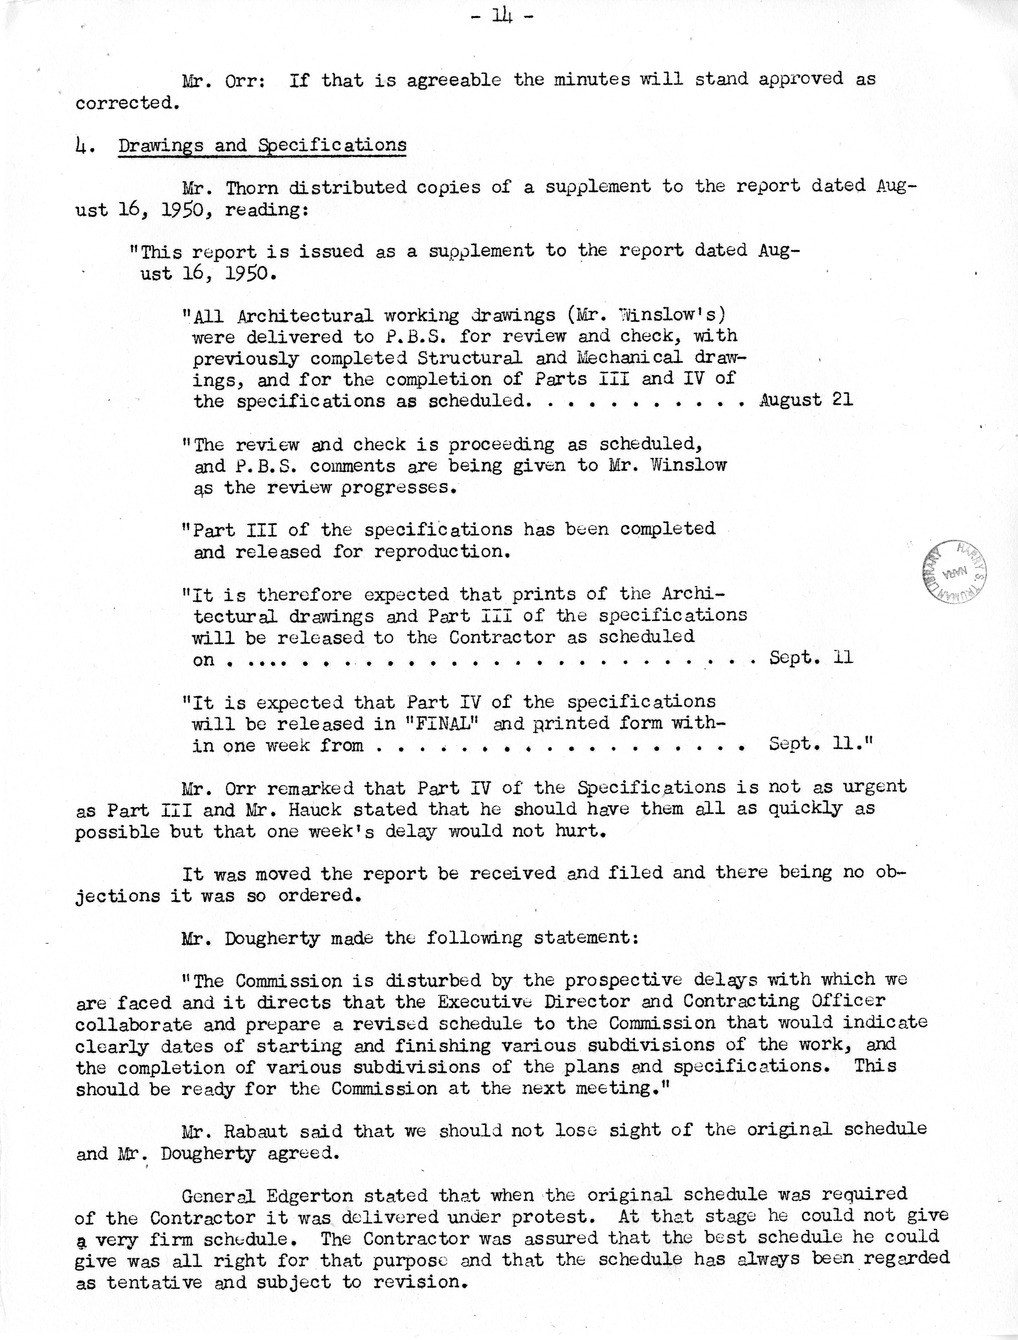 Minutes of the Twenty-Seventh Meeting of the Commission on Renovation of the Executive Mansion